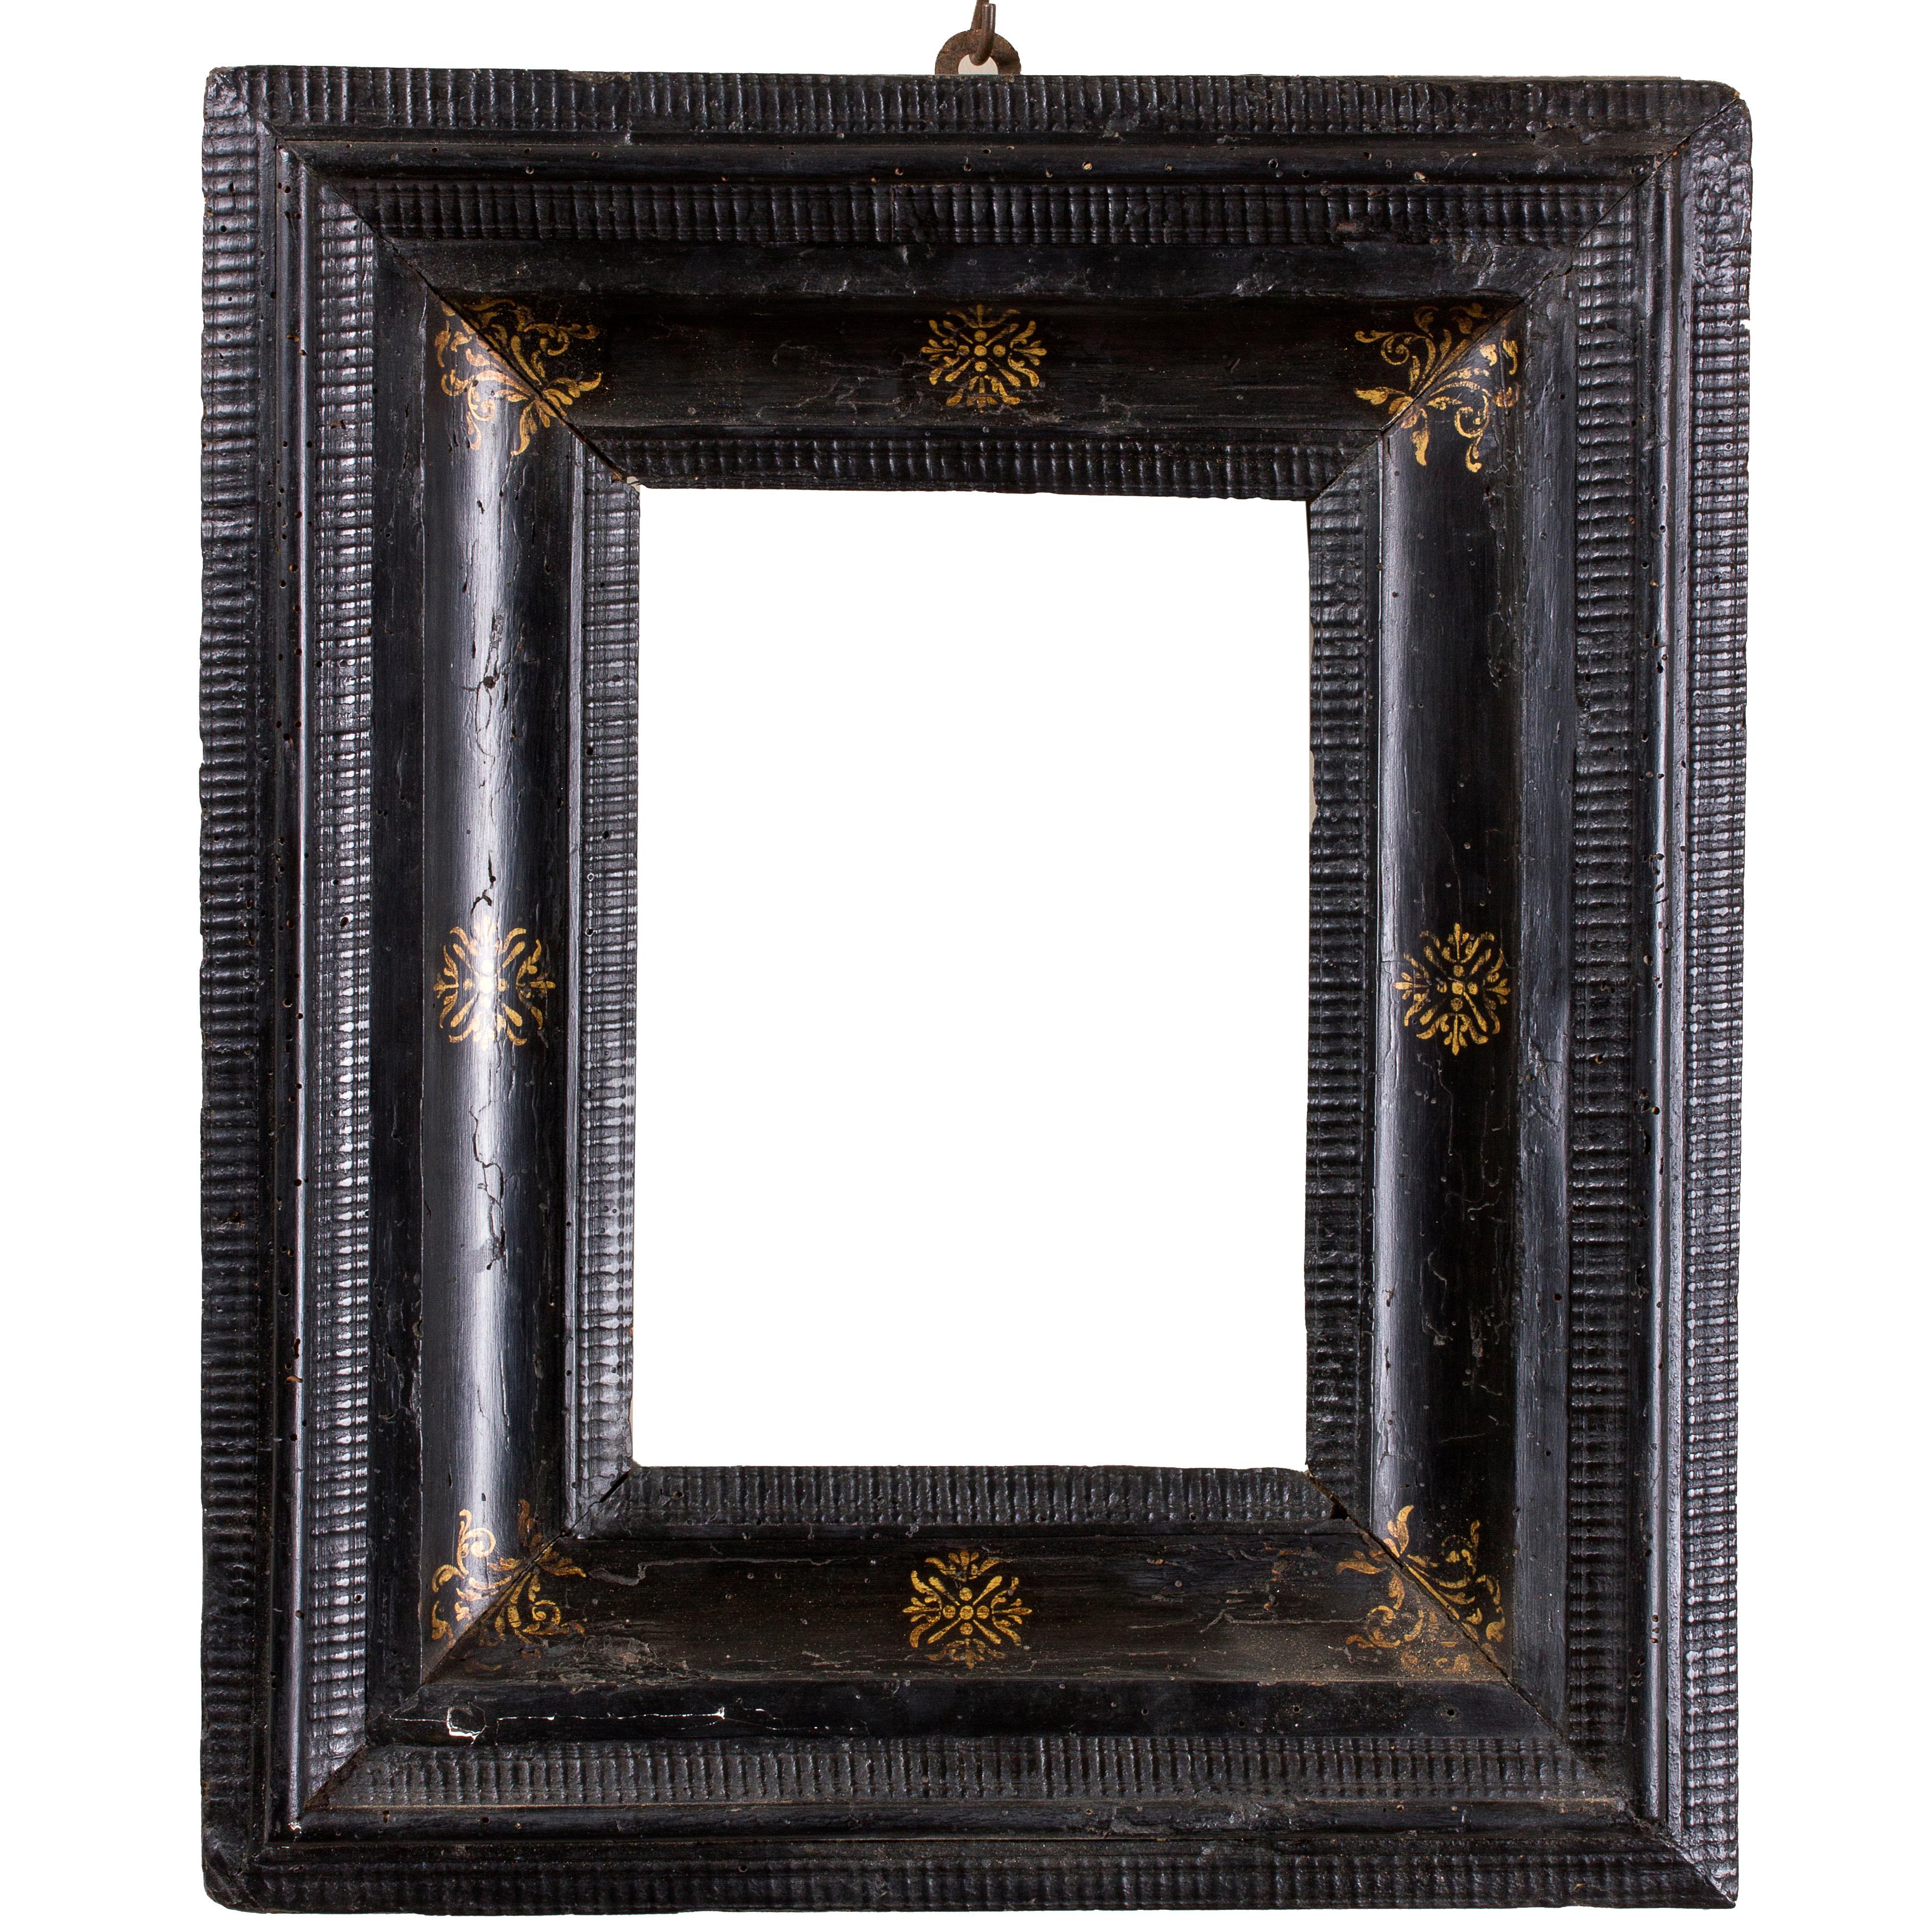 Guilloche Frame, First Quarter of the 17th Century